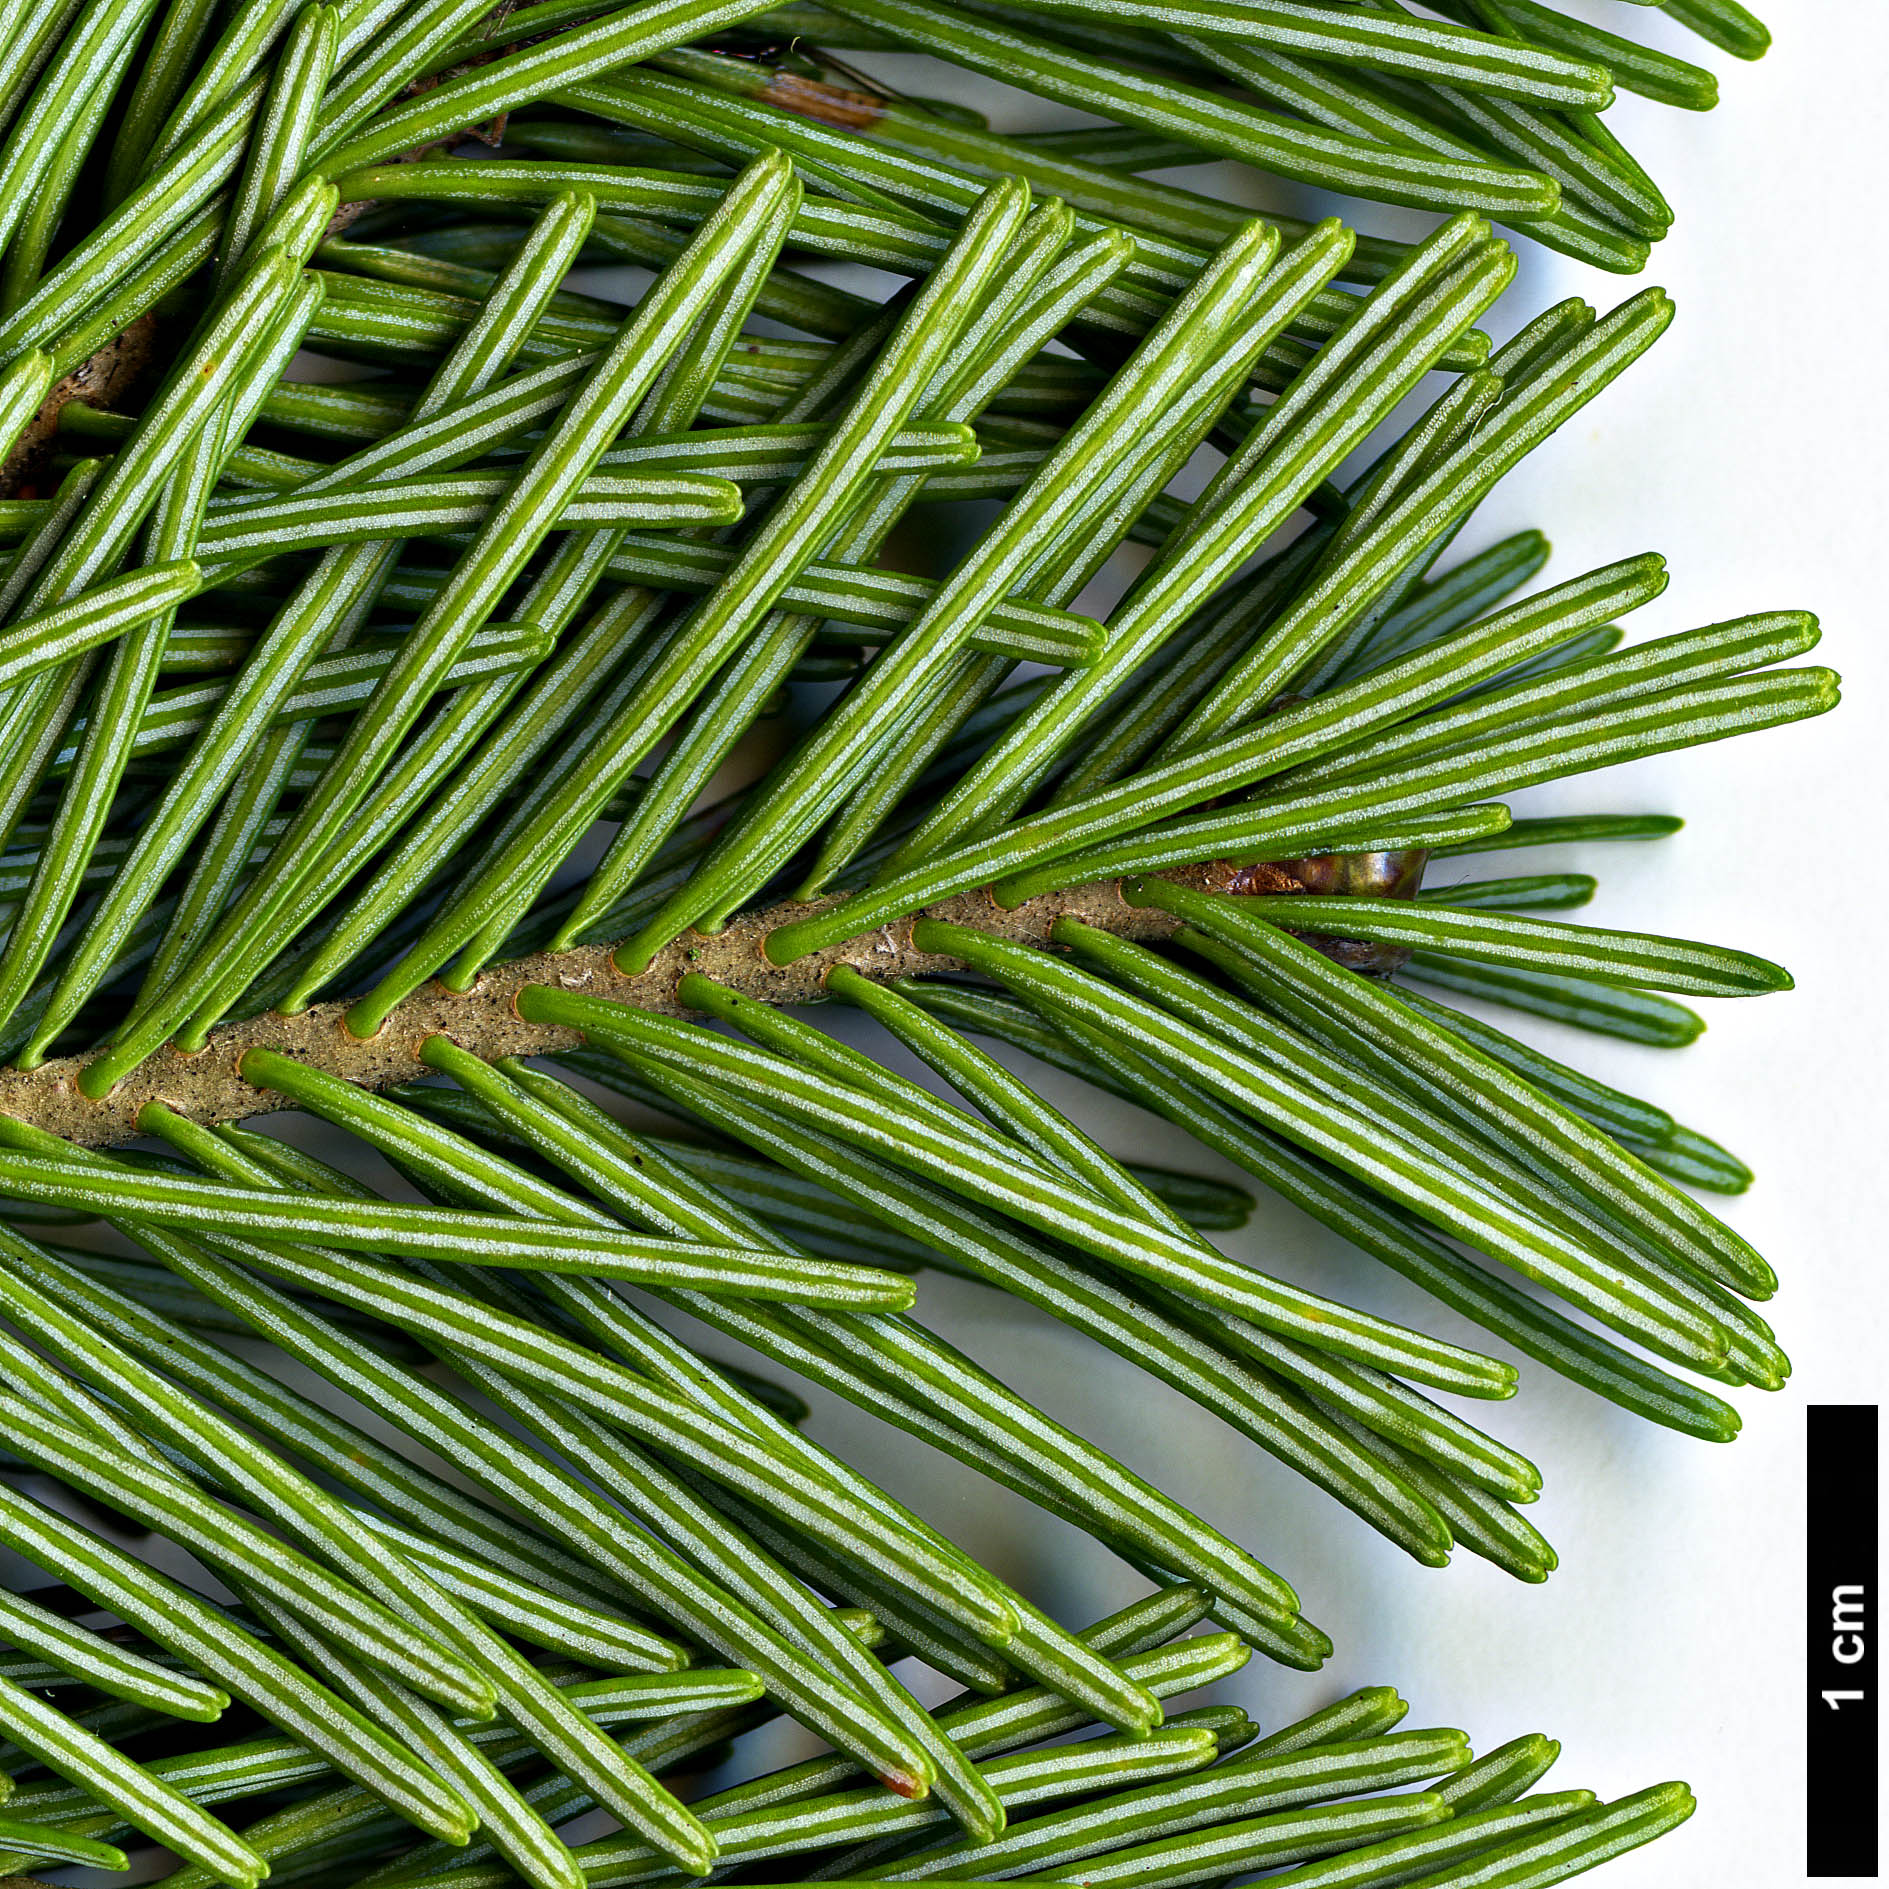 High resolution image: Family: Pinaceae - Genus: Abies - Taxon: sibirica